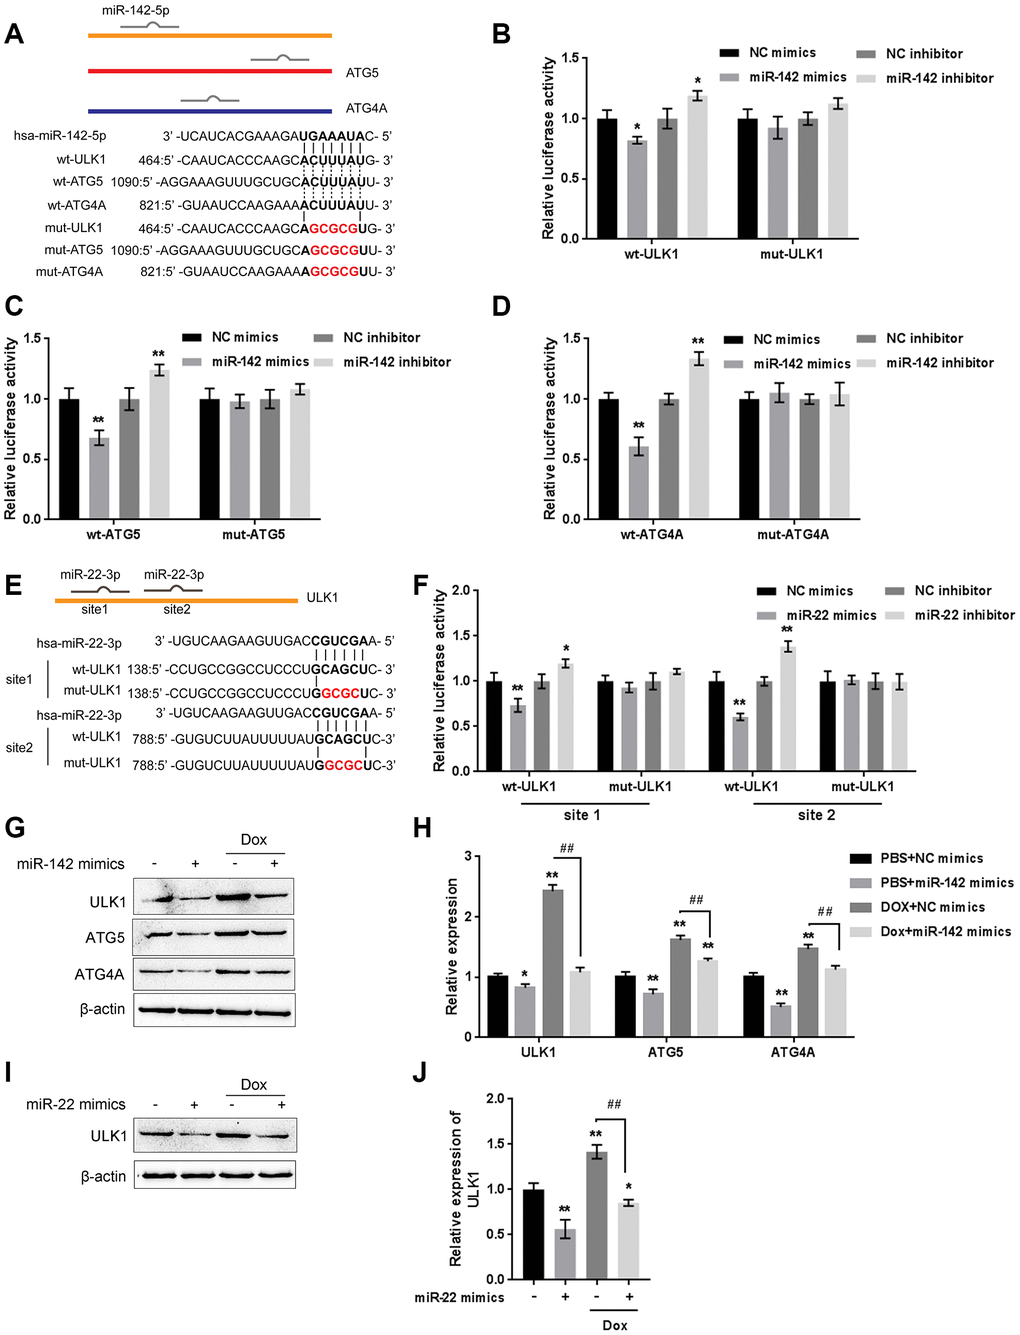 miR-22/miR-142 targets the key autophagy proteins ATG5, ATG4A and ULK1. (A) Predicted miR-142 binding sites in the ULK1, ATG4A, and ATG5 3'UTR. Wild-type and mutant-type ULK1, ATG4A, and ATG5 3'UTR reporter vectors containing wild-type or mutant-type miR-142 binding sites were constructed. (B–D) These vectors were co-transfected into HEK293 cells with miR-142 mimics or inhibitor, and the luciferase activity was determined. (E) Predicted miR-22 binding sites in ULK1. Wild-type and mutant-type ULK1 3'UTR reporter vectors containing wild- or mutant-type miR-22 binding sites were constructed. (F) These vectors were cotransfected into HEK293 cells with miR-22 mimics or inhibitor, and the luciferase activity was determined. (G, H) U2OS cells were transfected with miR-142 mimics in the presence or absence of Dox and examined for the protein levels of ULK1, ATG4A, and ATG5 were examined. (I, J) U2OS cells were transfected with miR-22 mimics in the presence or absence of Dox (5 μM), and the protein levels of ULK1 were examined. The data are presented as the mean ± SD of three independent experiments. *PPP